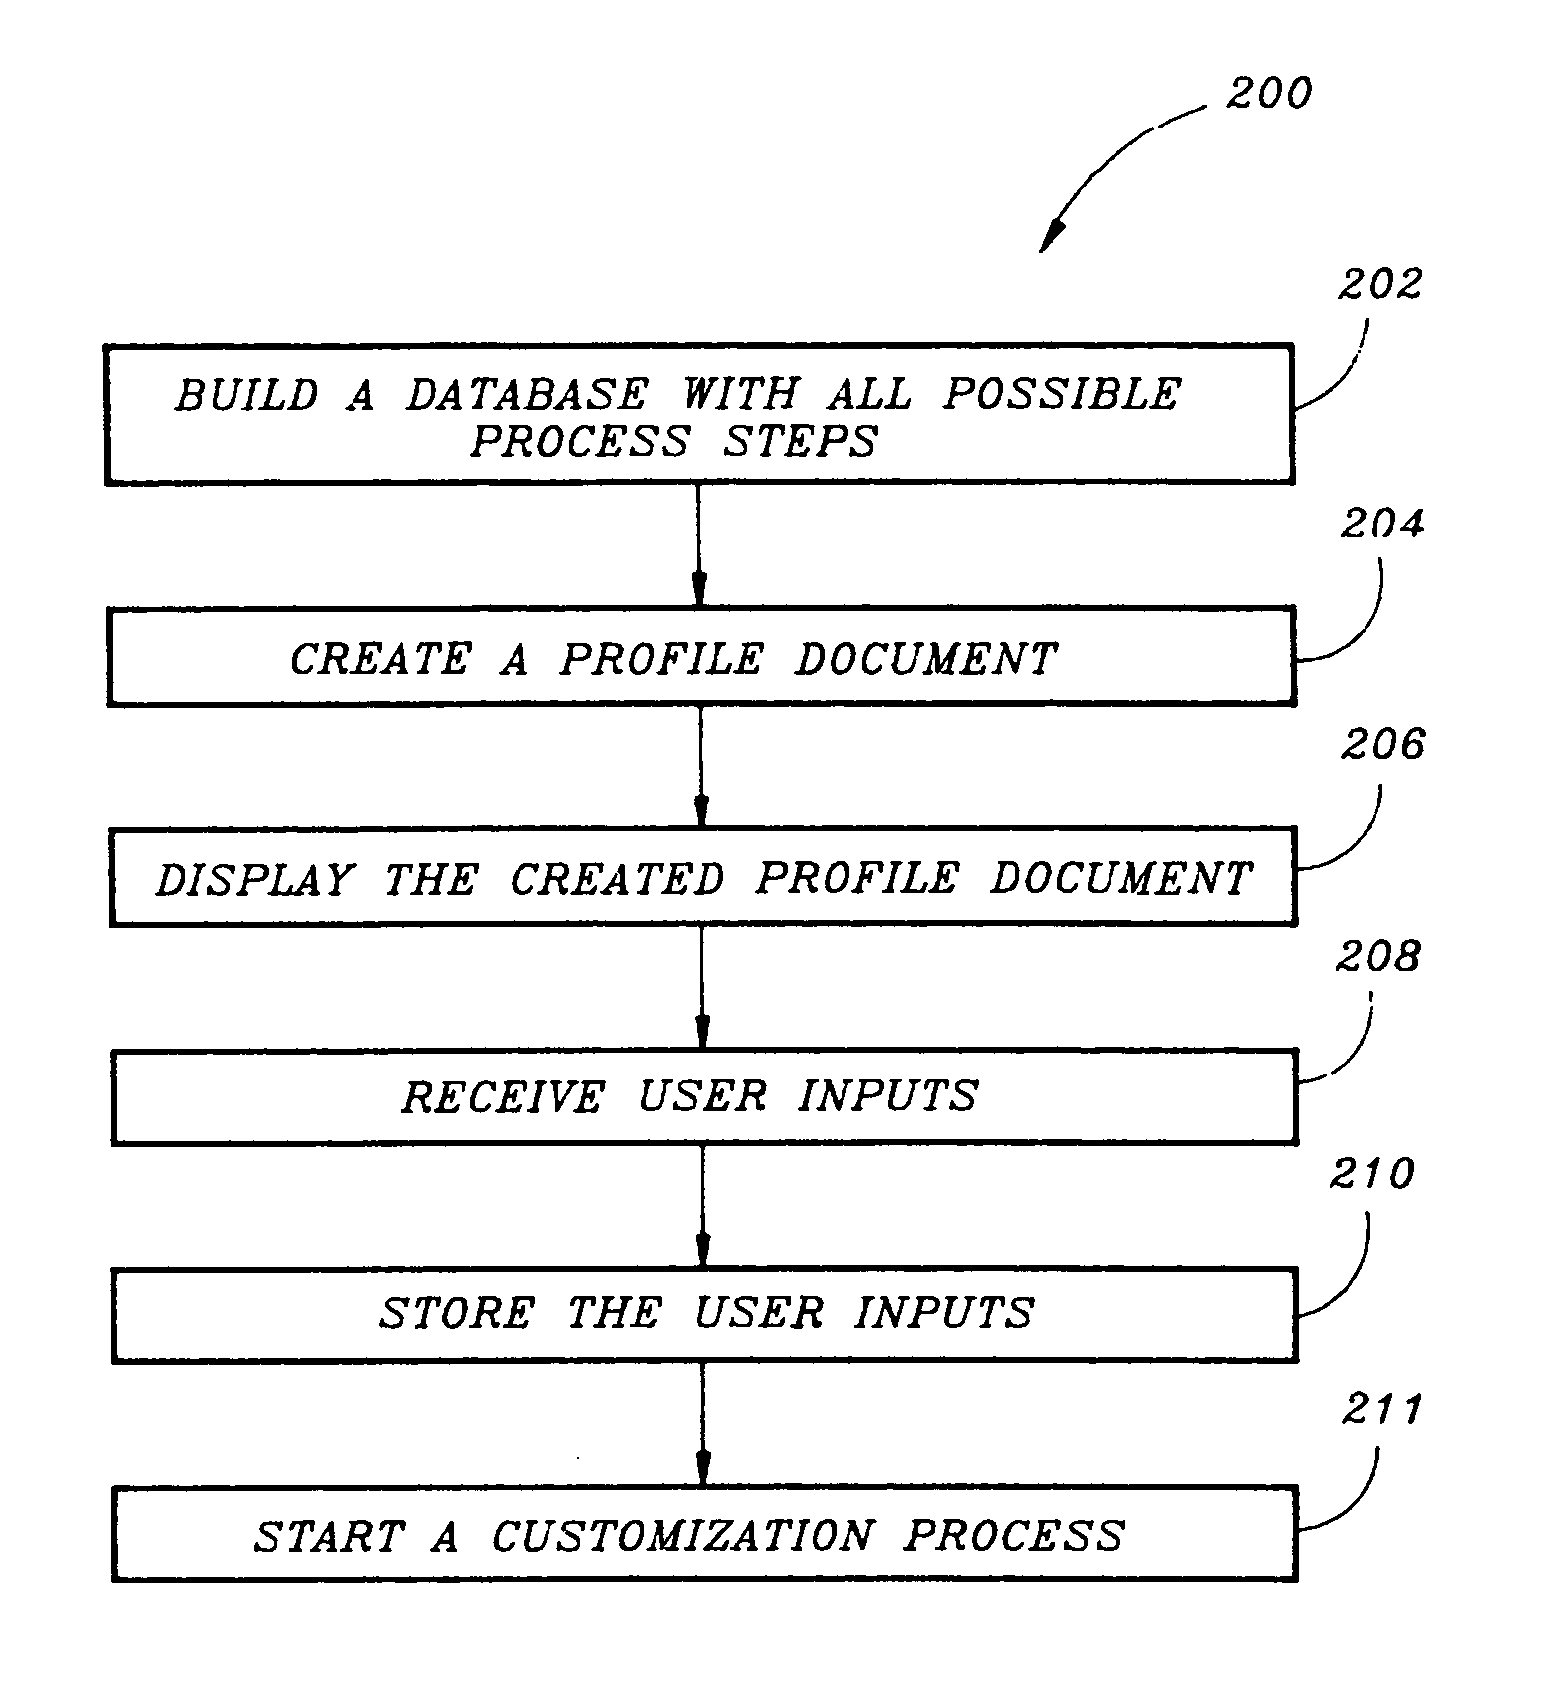 System and method for automated customization of a workflow management system